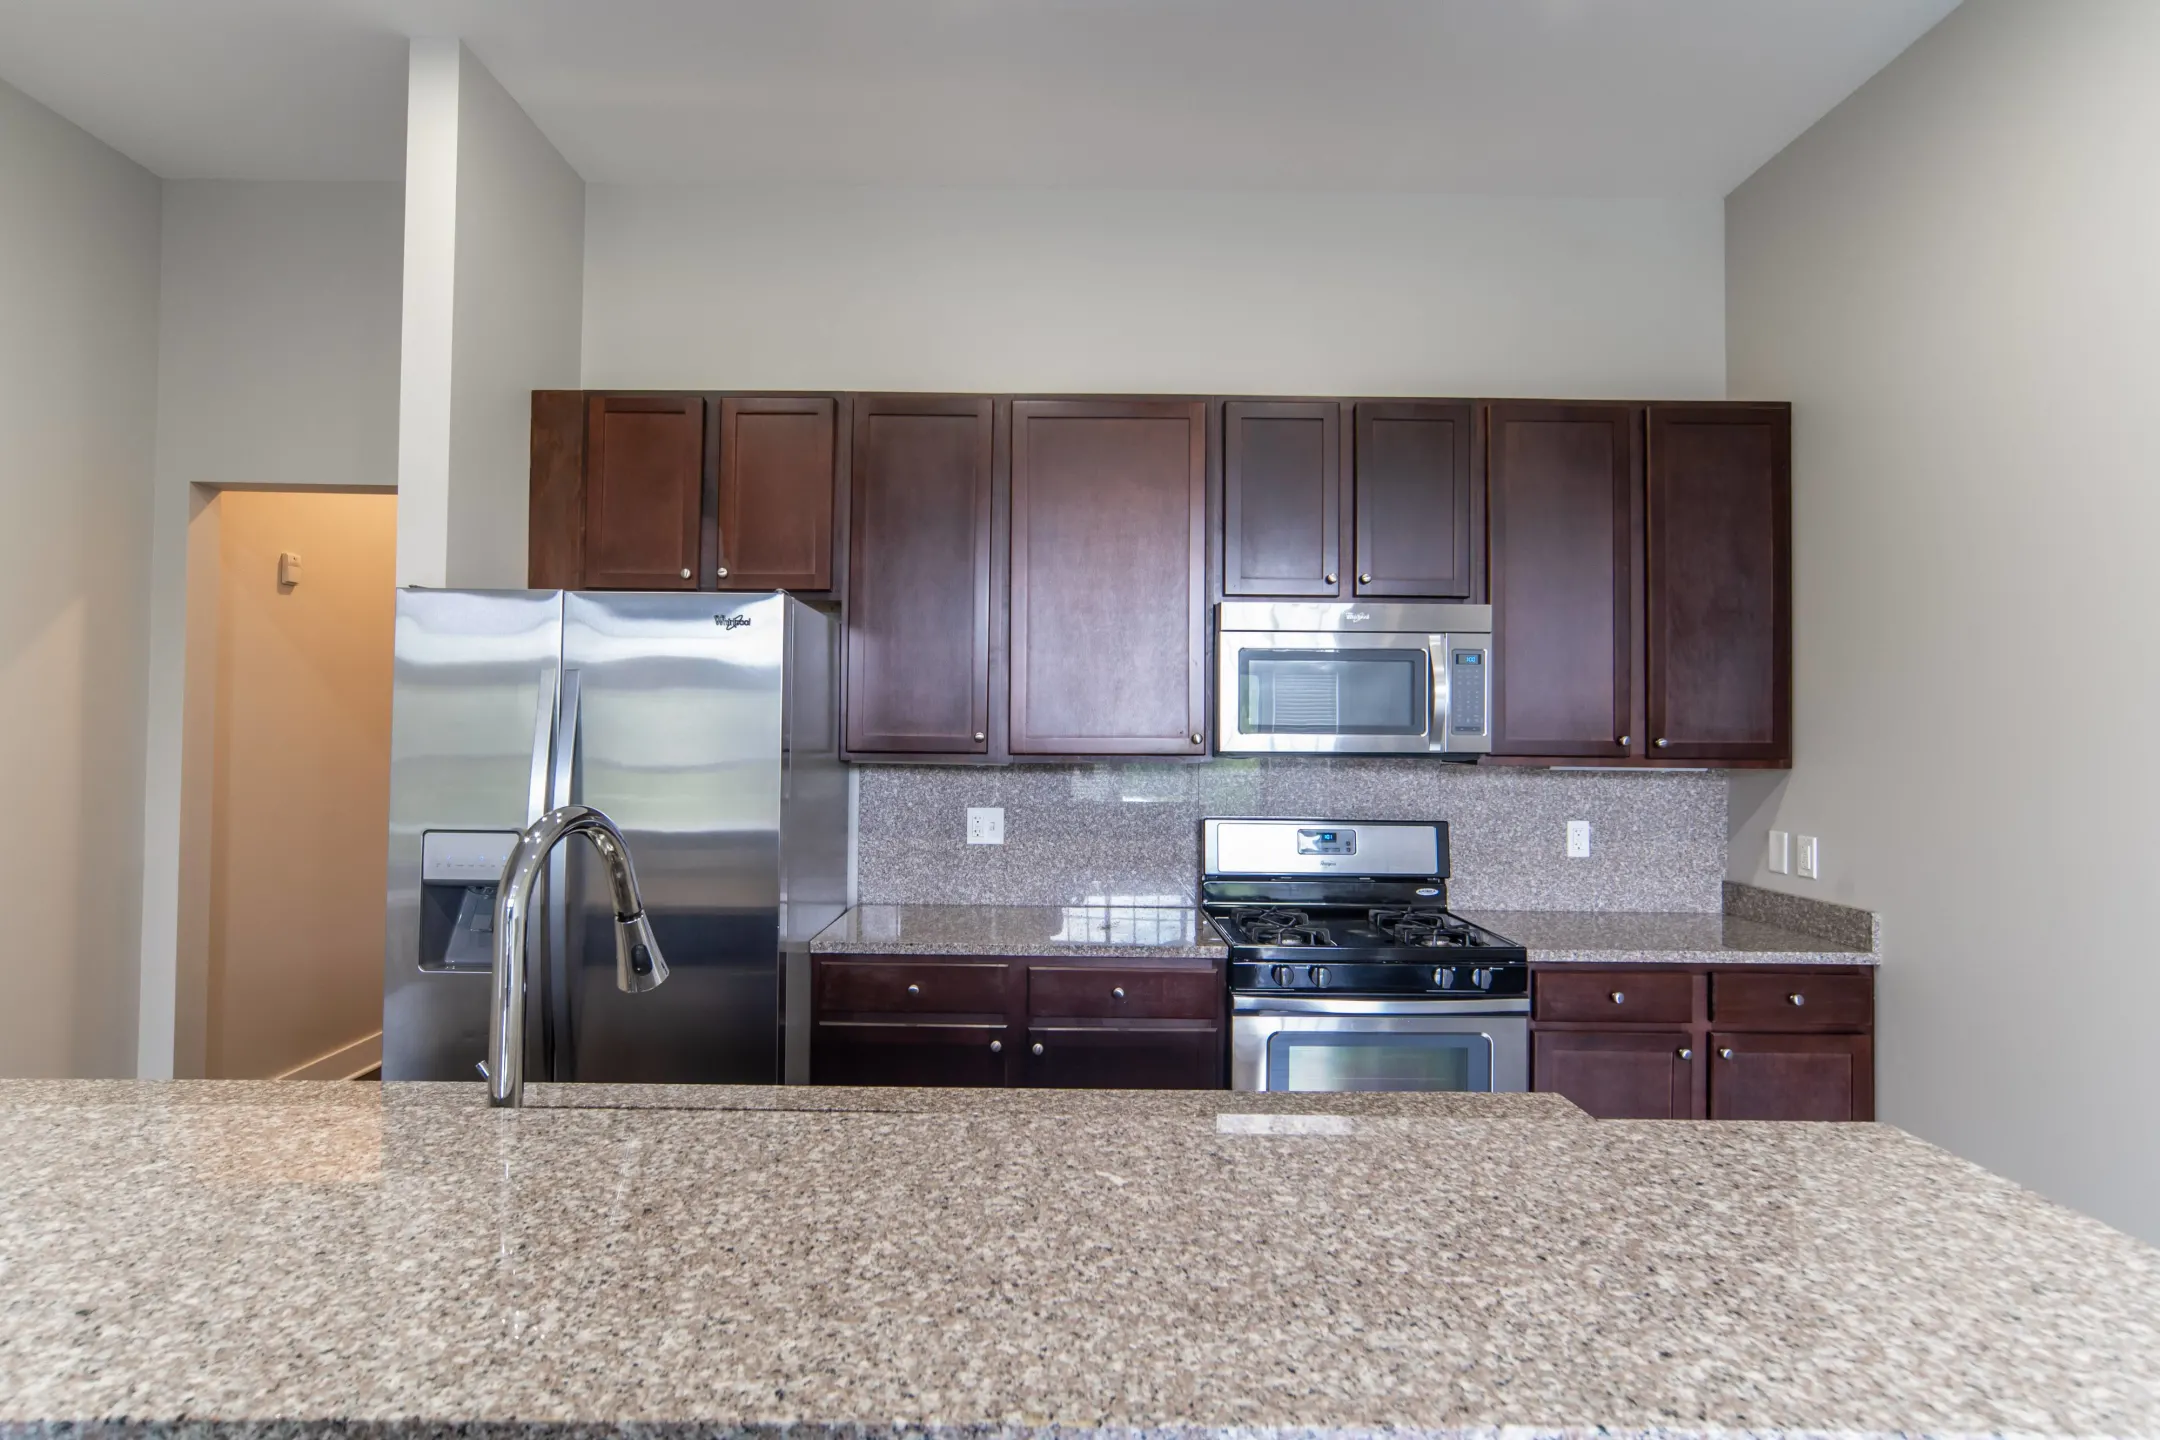 Kitchen - Residences Of Creekside - Gahanna, OH